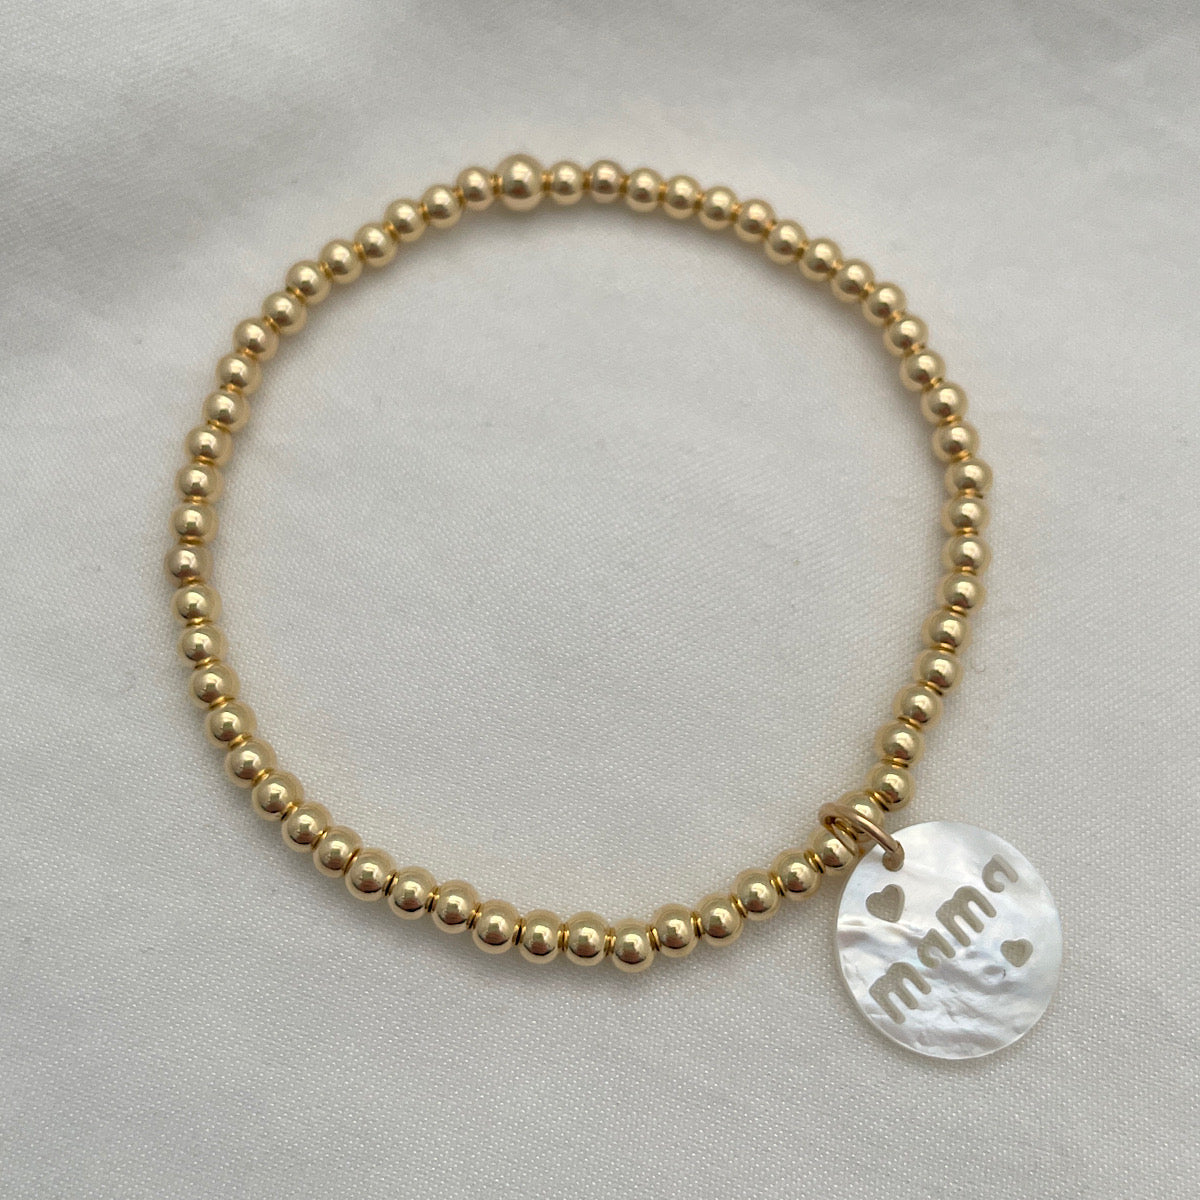 MAMA Mother of Pearl Charm Bead Bracelet Gold Fill